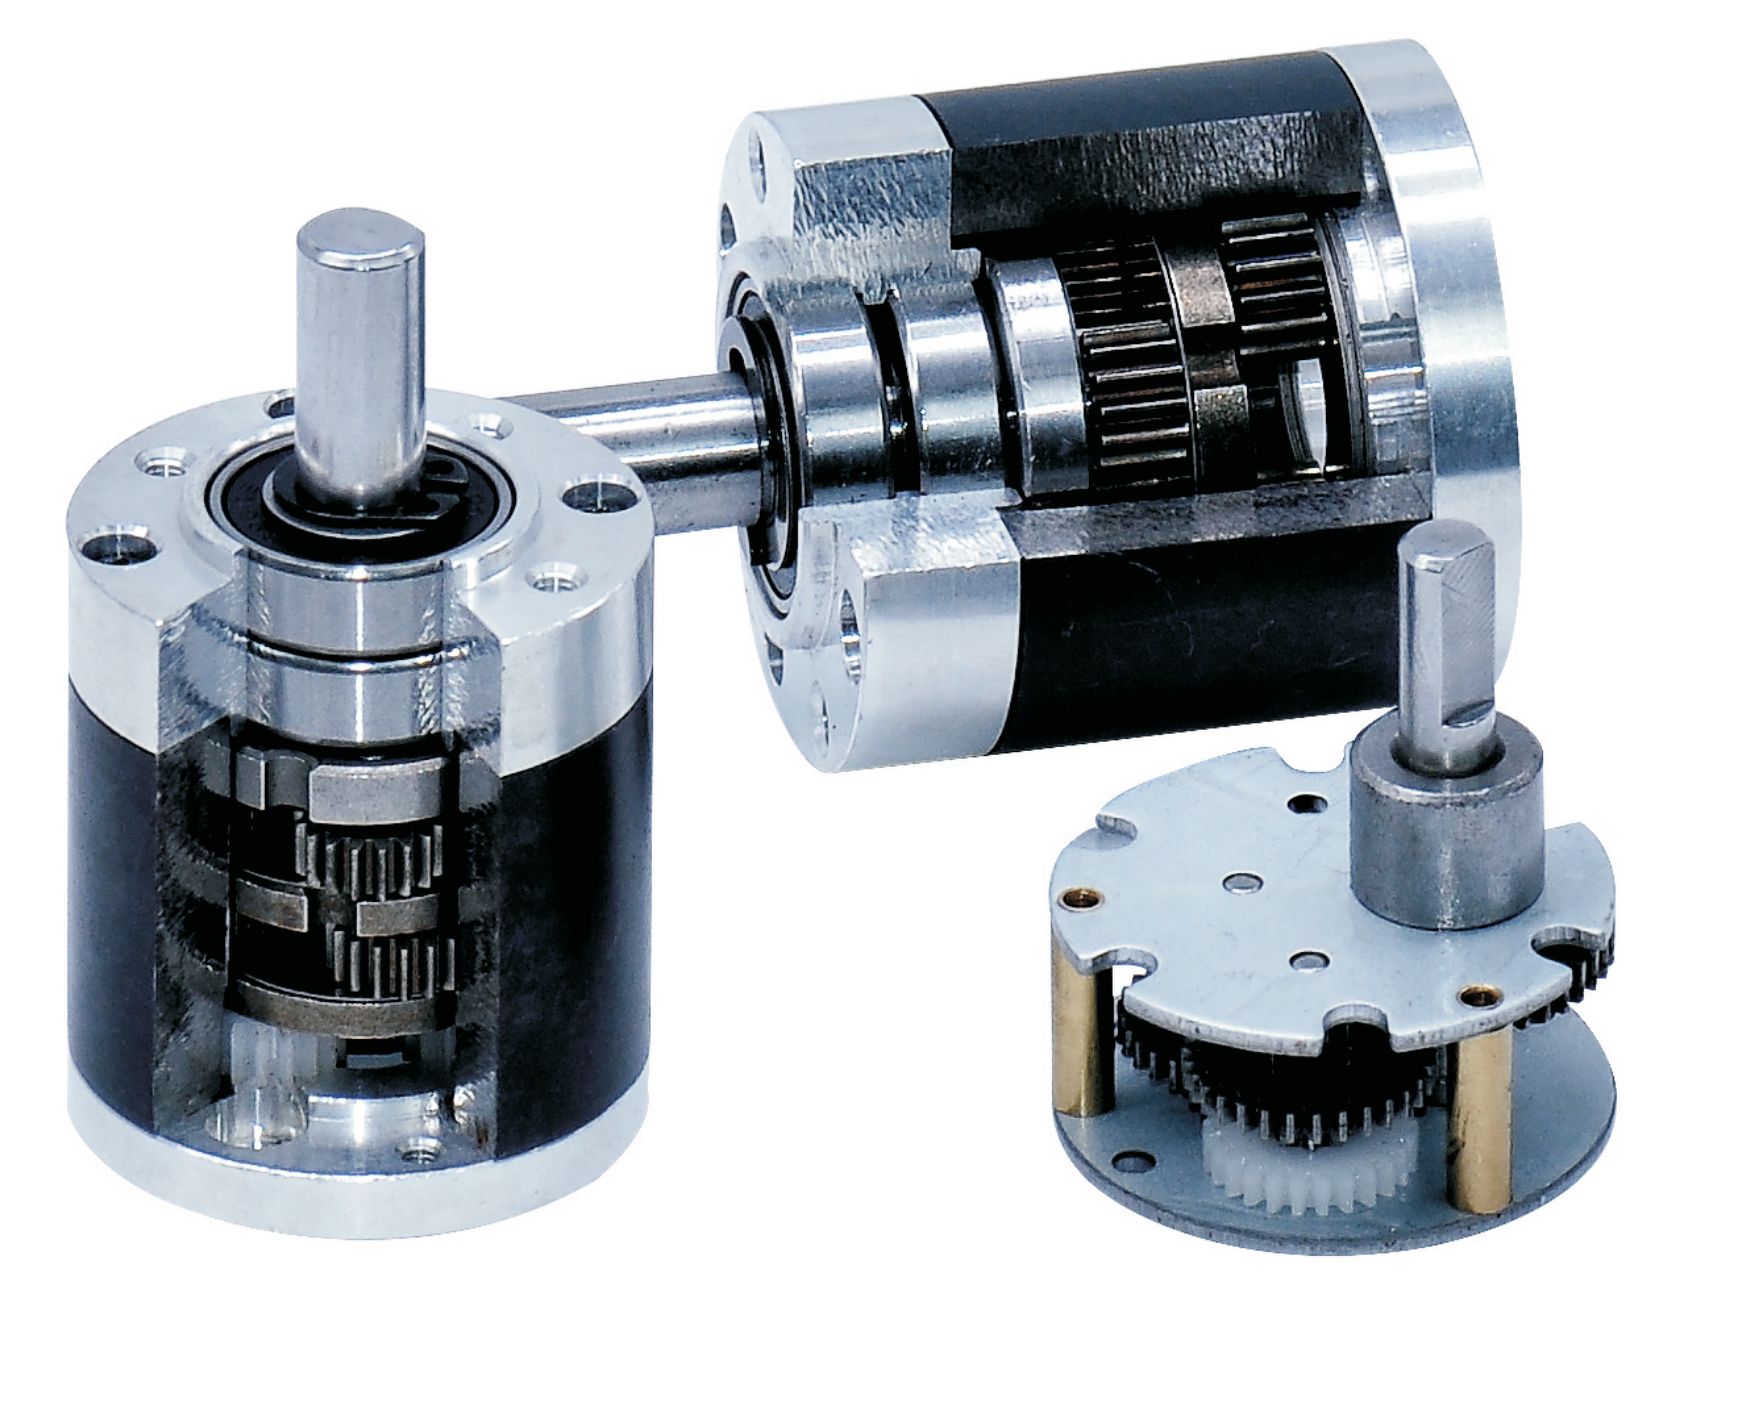 The difference between spur gearbox and planetary gearbox